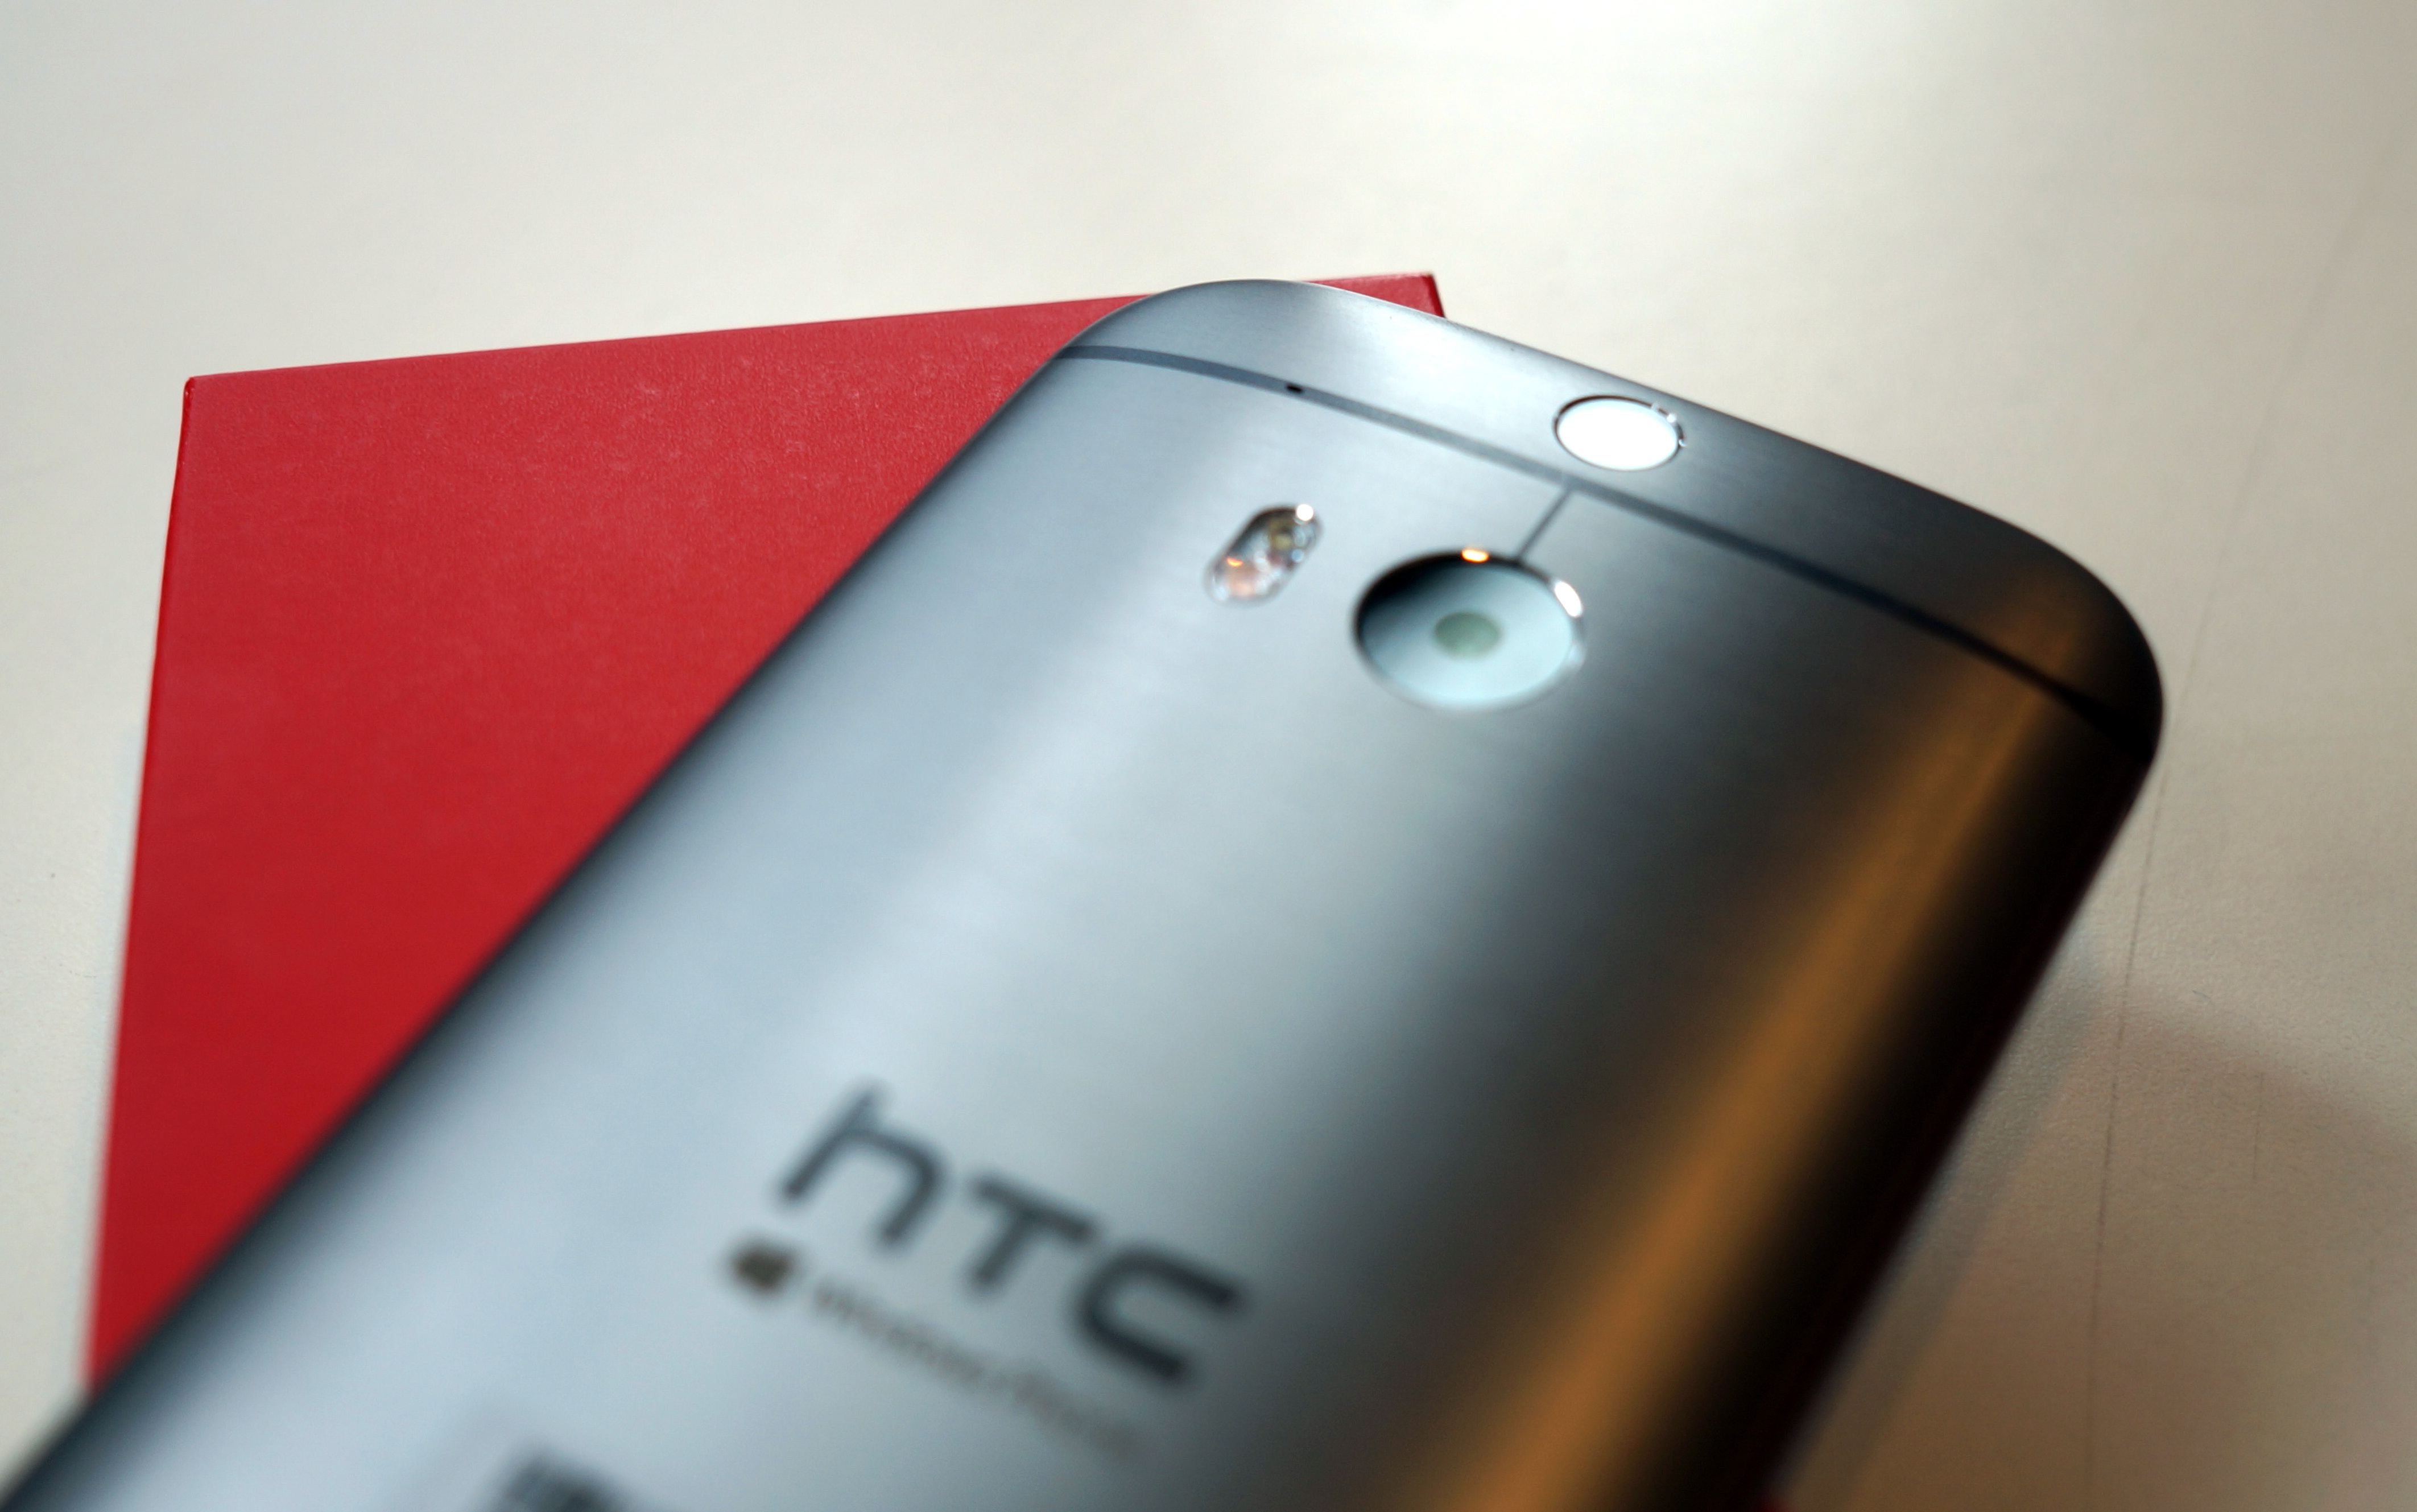 Unboxing the HTC One (M8) for Windows – HTC Source